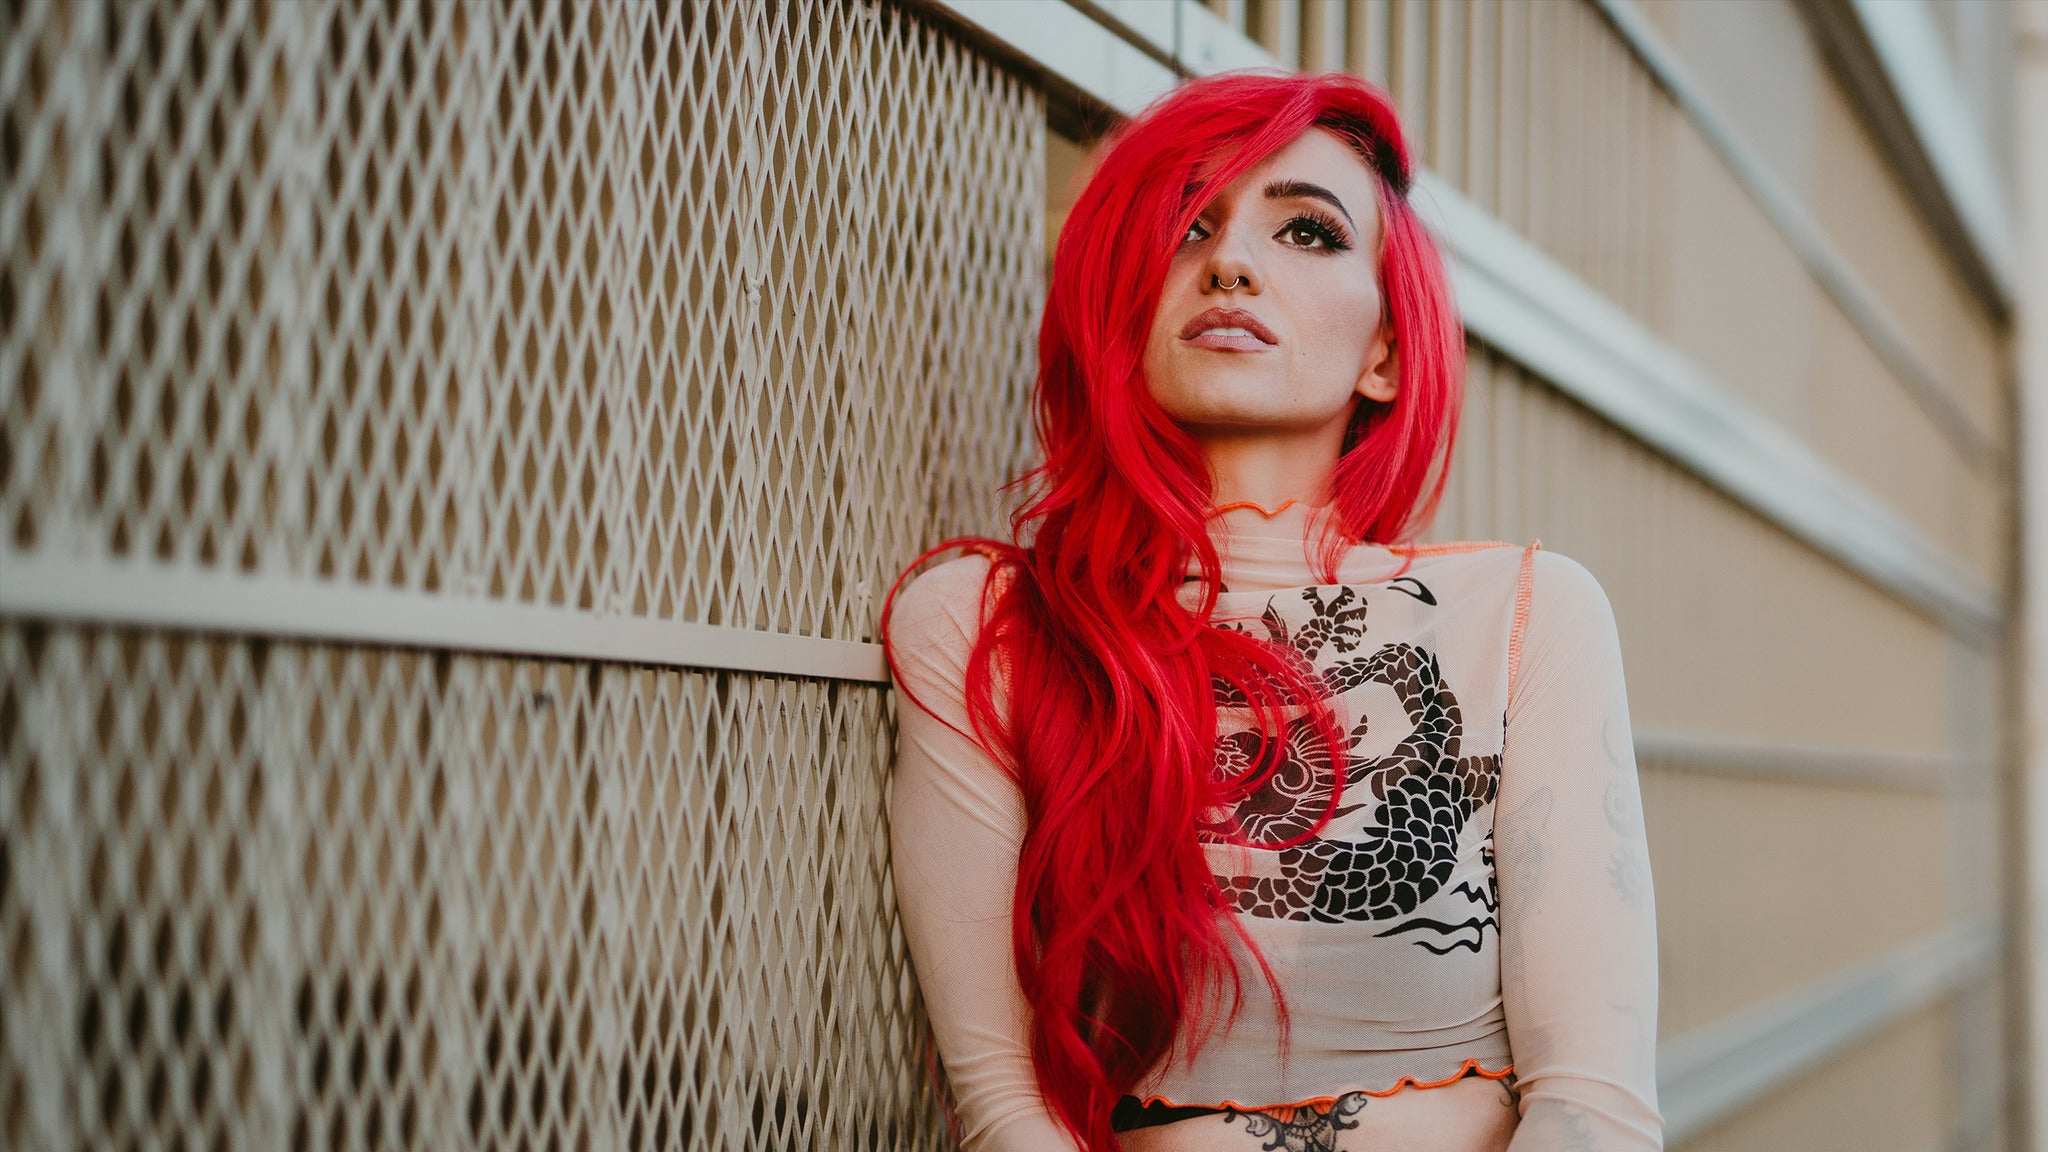 Lights - We Were Here Tour in Kansas City promo photo for Local presale offer code